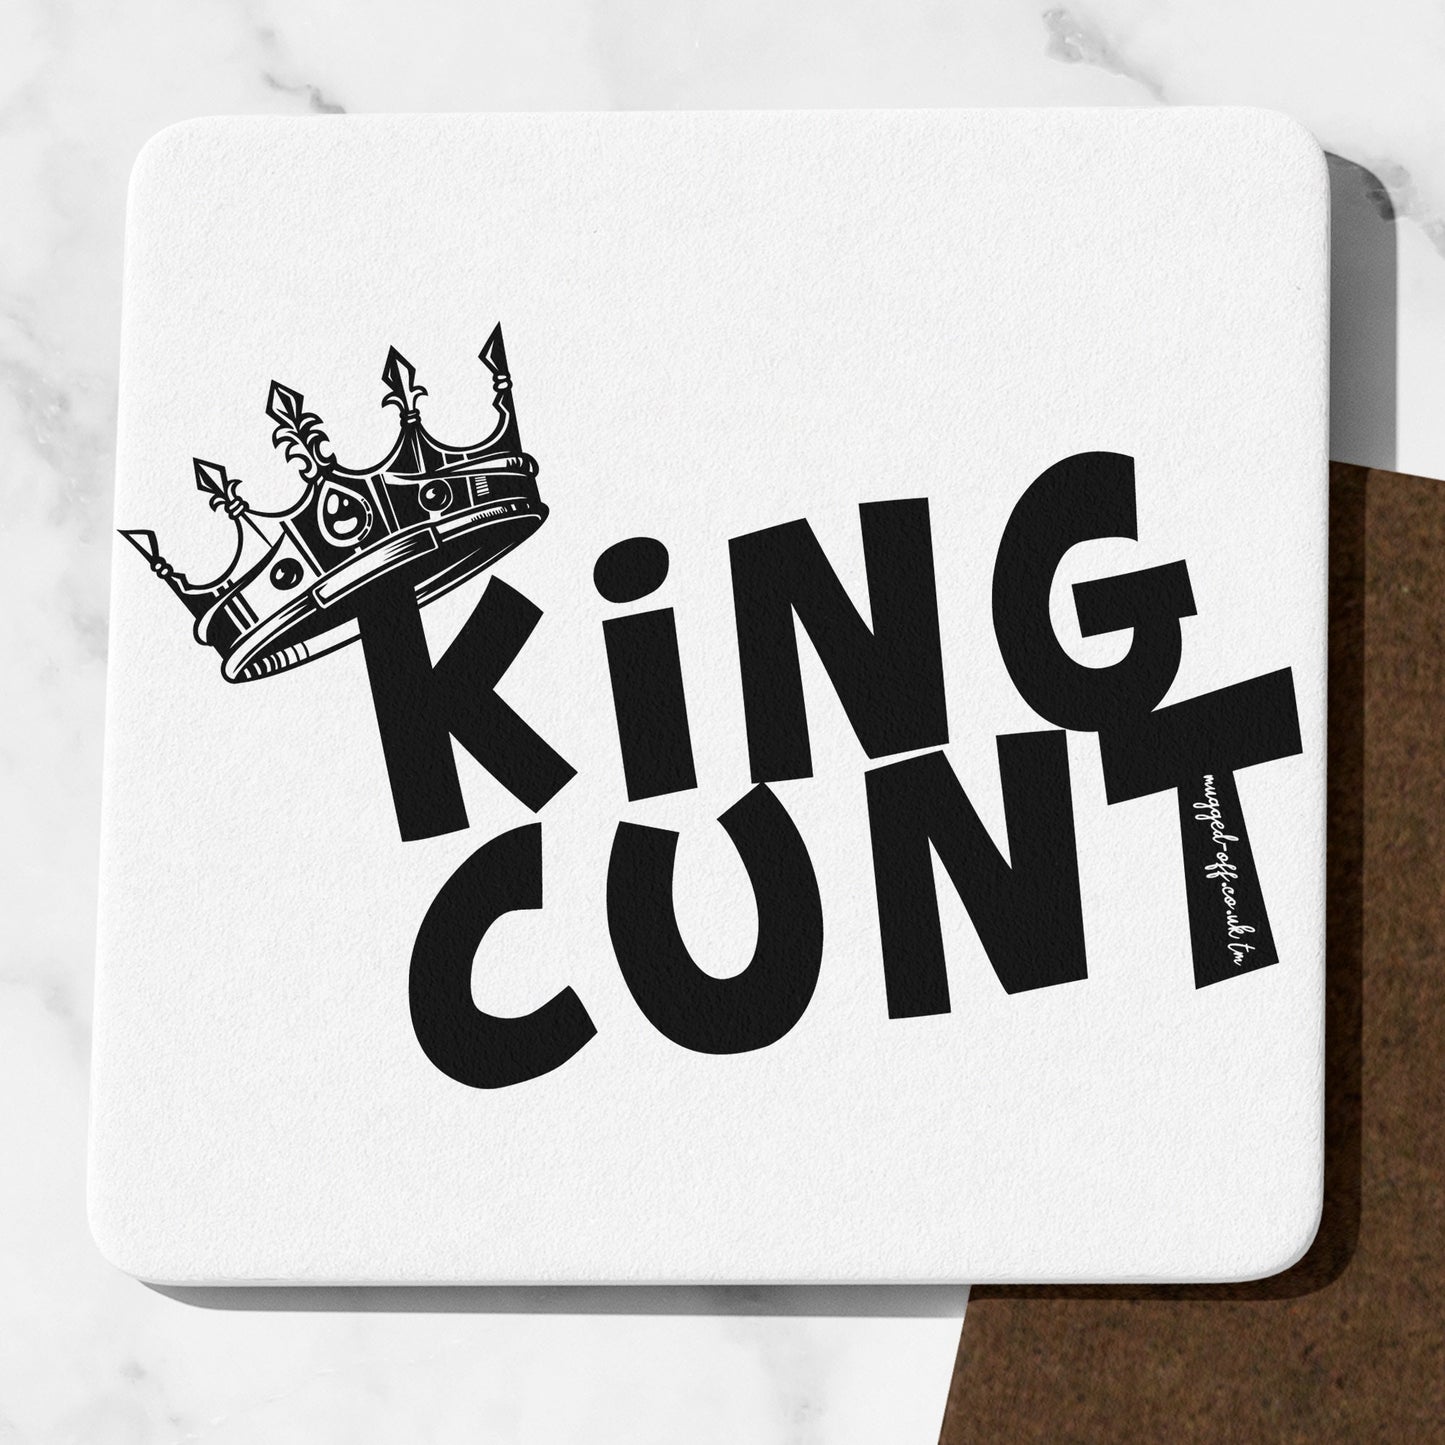 Cunt Coaster - Funny Adult Birthday Coaster | Profanity Coaster | Birthday Sweary Coaster | Cunt Funny Profanity Coaster,| Leaving Rude Gift